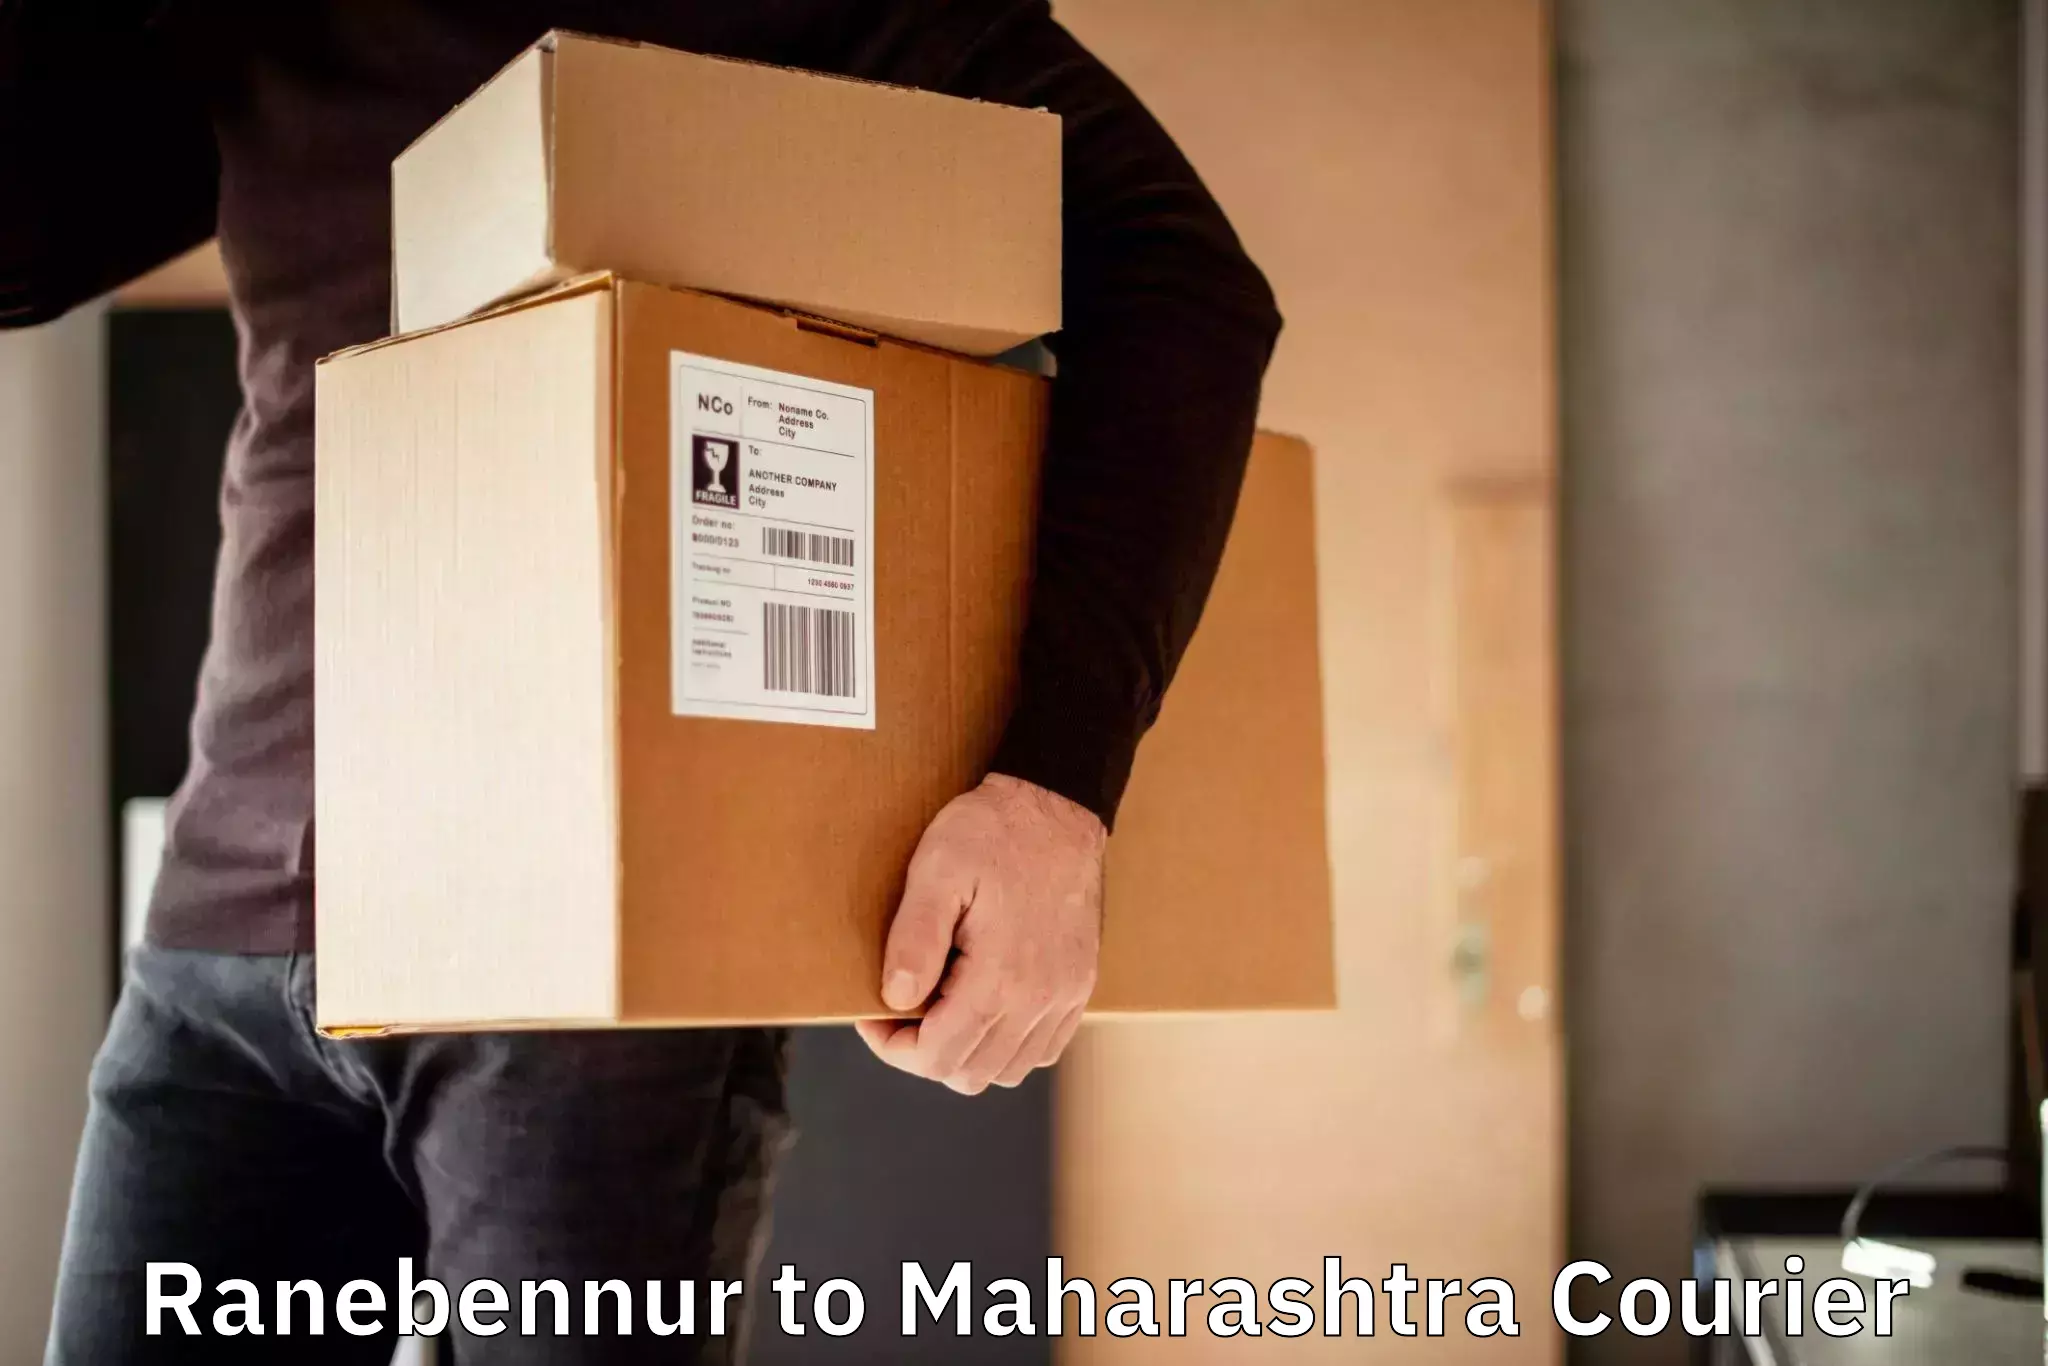 Same-day delivery solutions Ranebennur to Pune